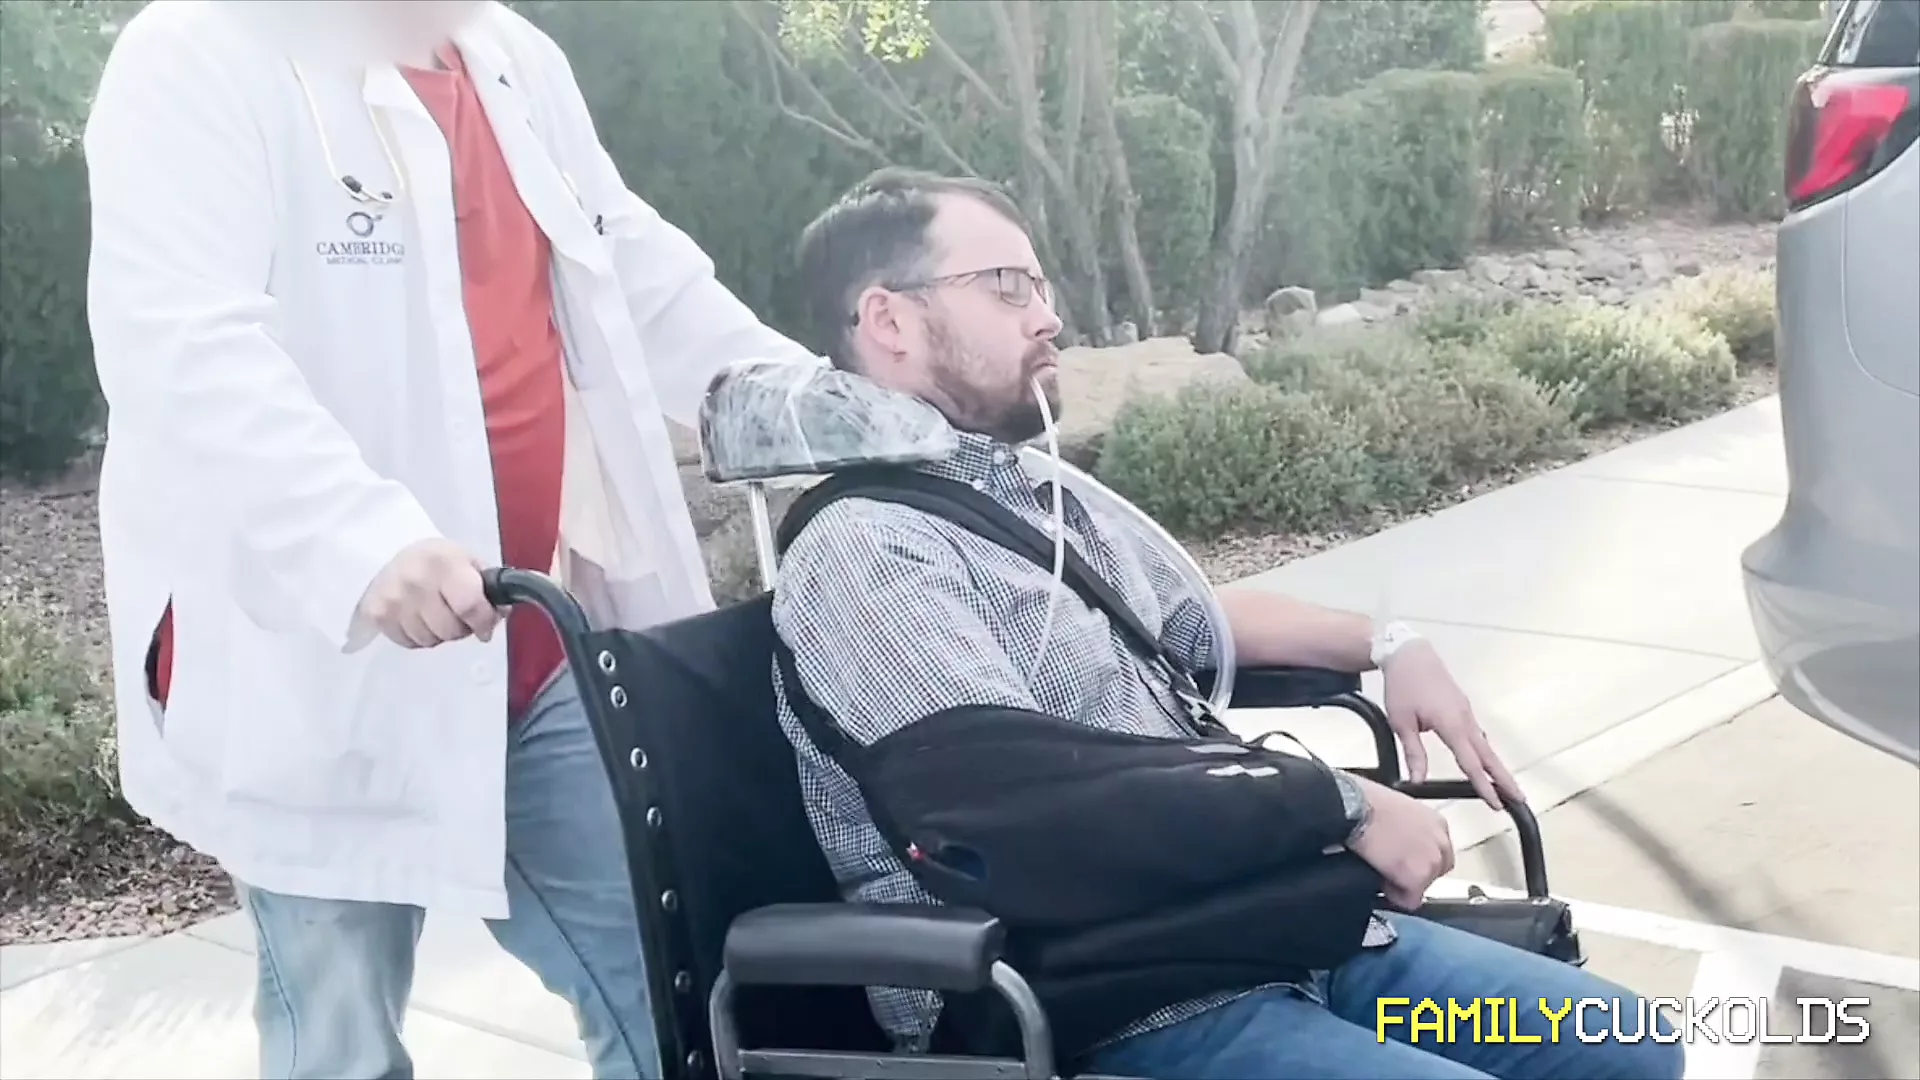 cuckold husband tries to leave wife and ends up in wheel chair image